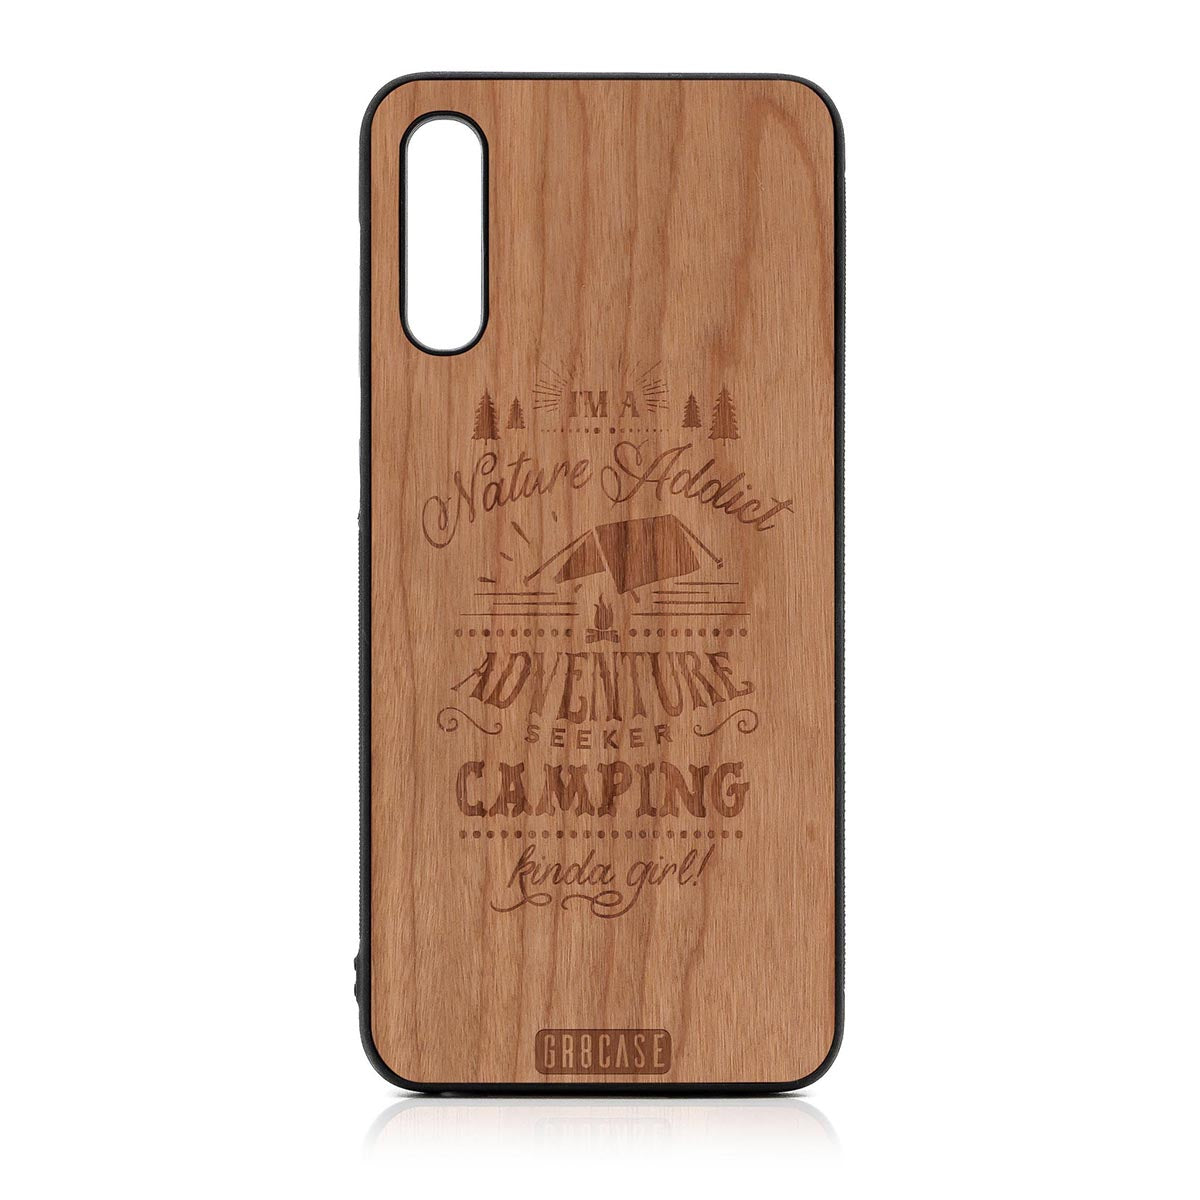 I'm A Nature Addict Adventure Seeker Camping Kinda Girl Design Wood Case For Samsung Galaxy A50 by GR8CASE